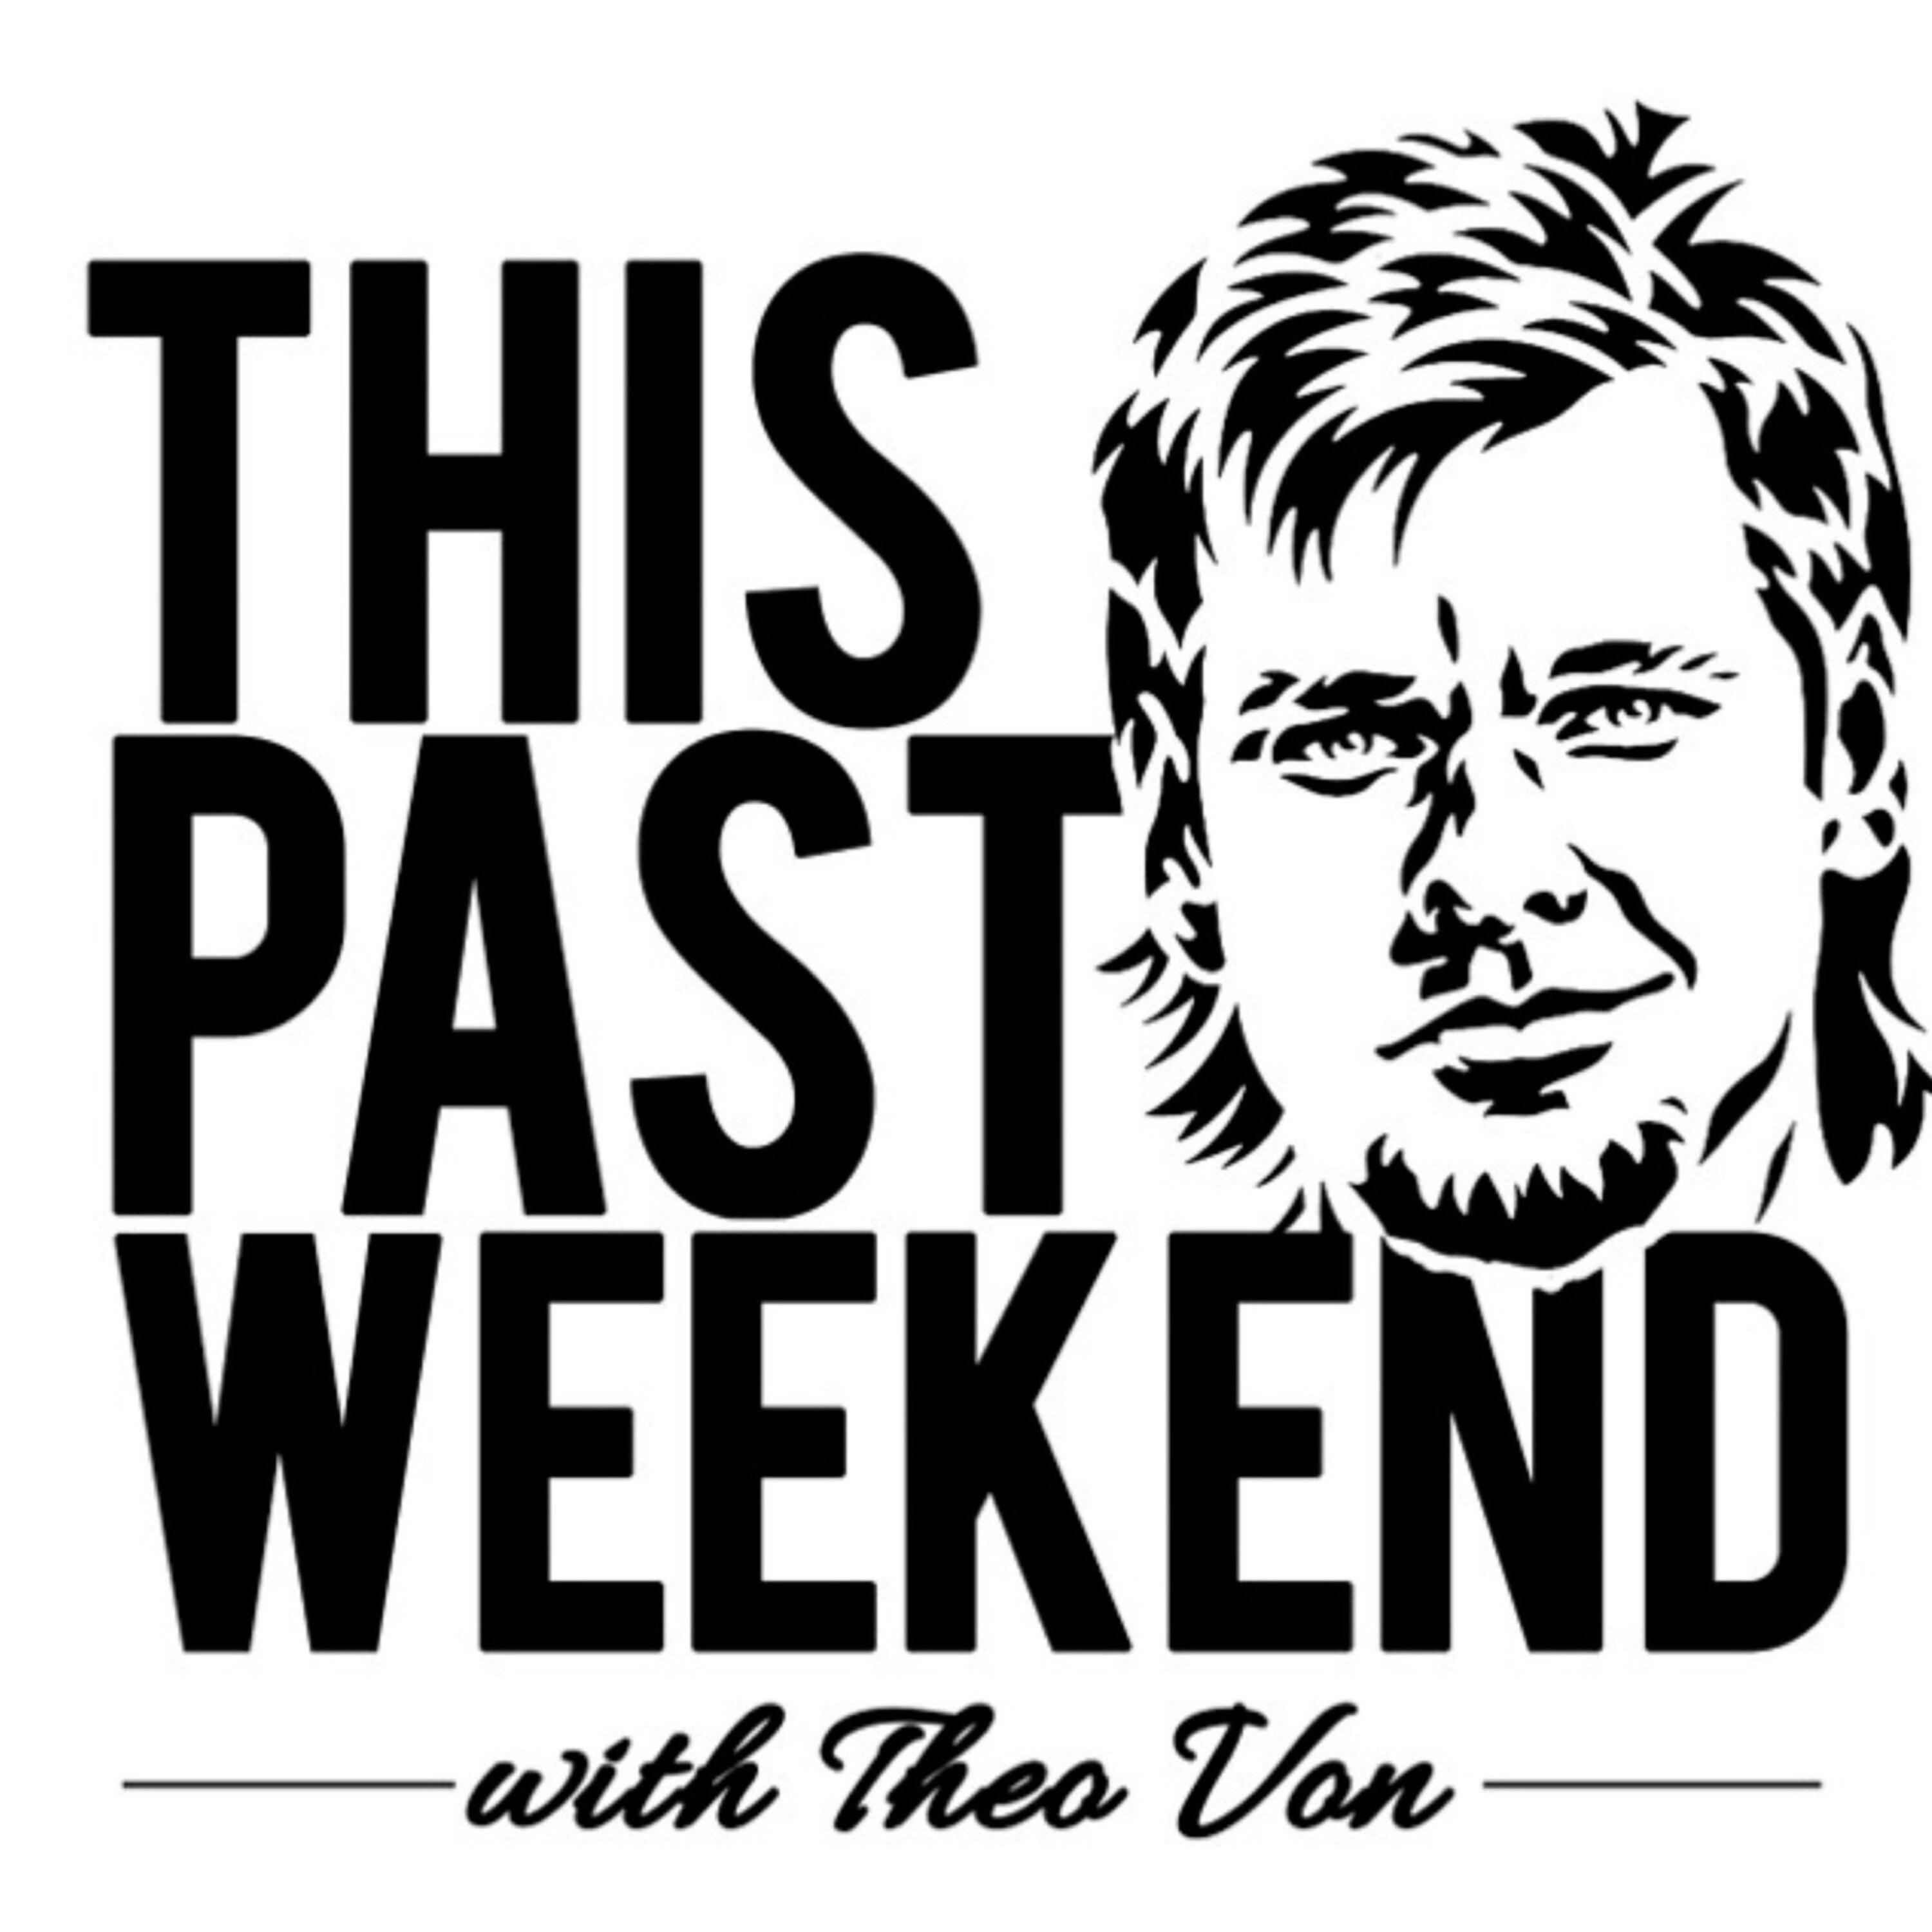 2-5-18 | This Past Weekend #72 by Theo Von